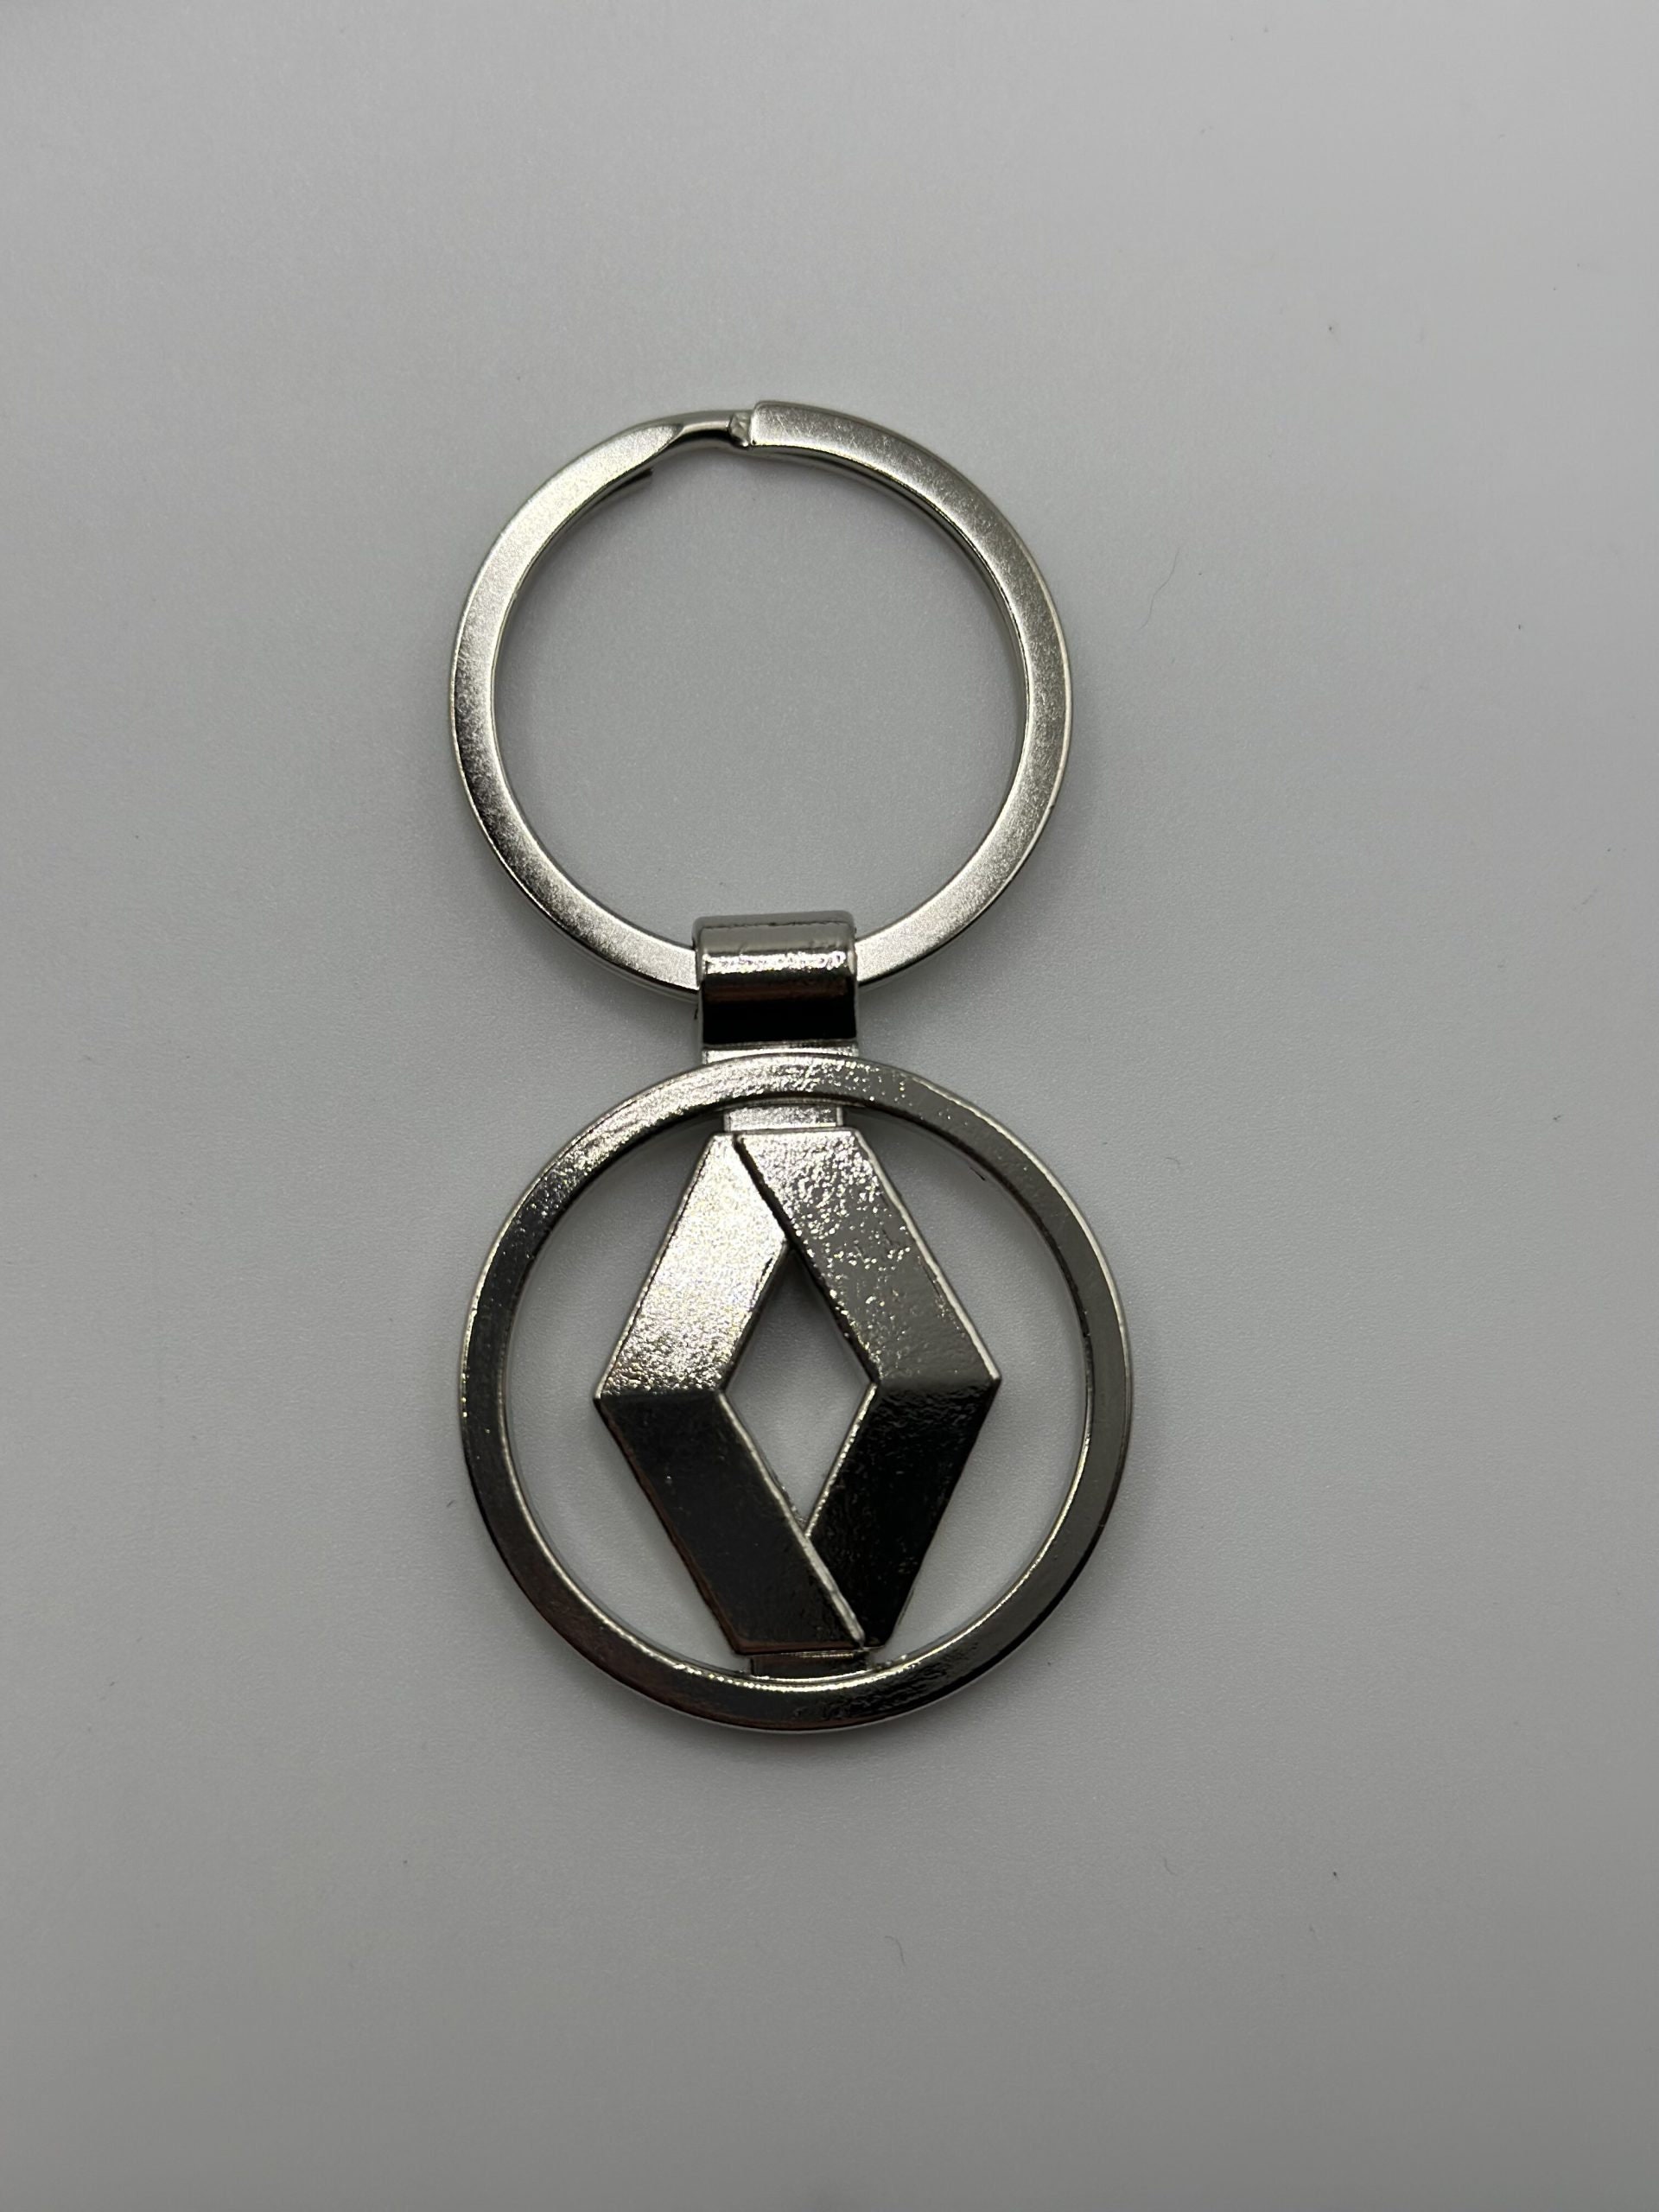 Get Your Renault Key Cover To Make Copies Of Your House Key 